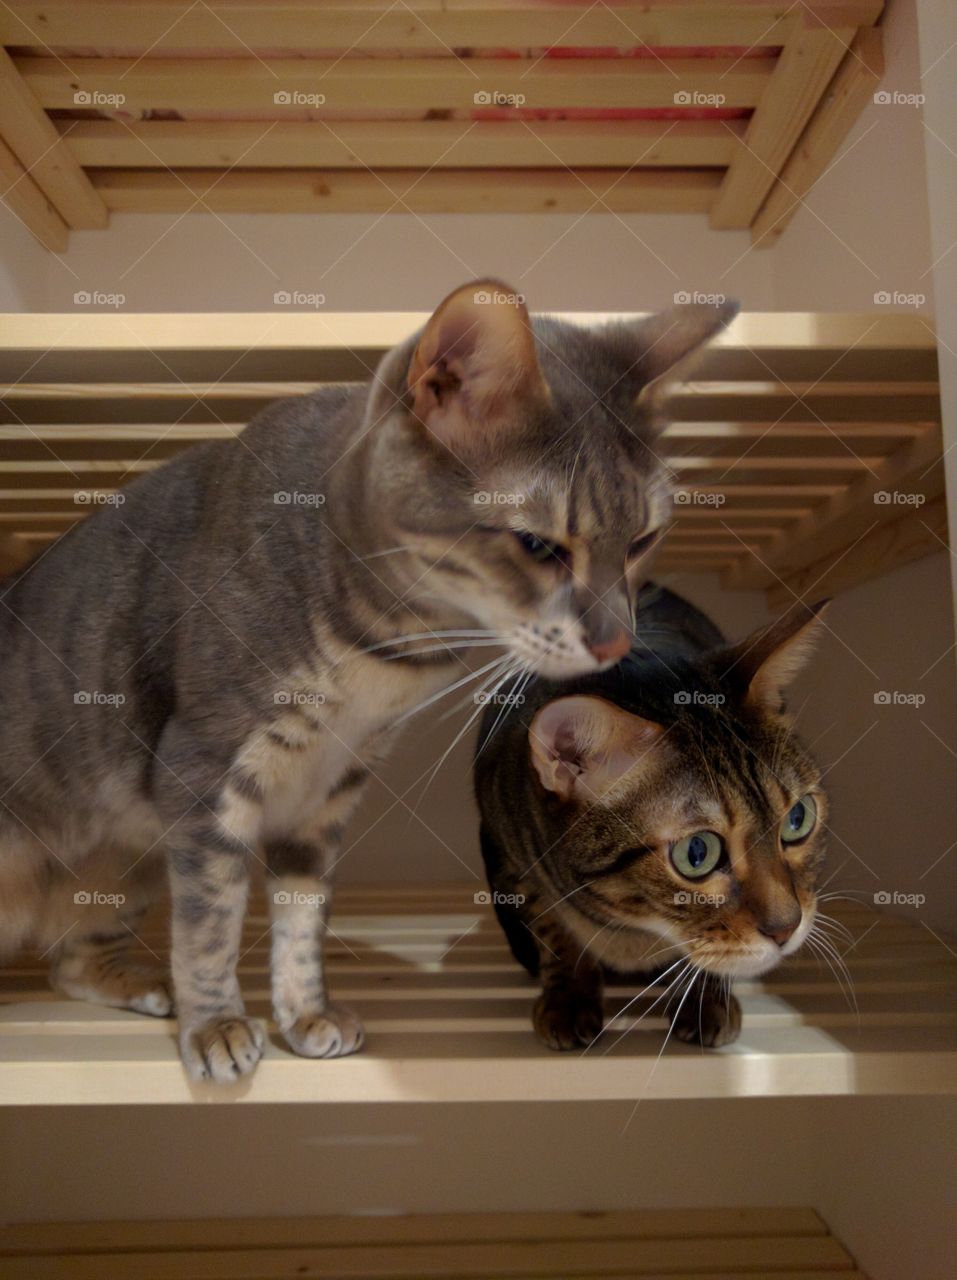 Two kittens play together on a cupboard shelf